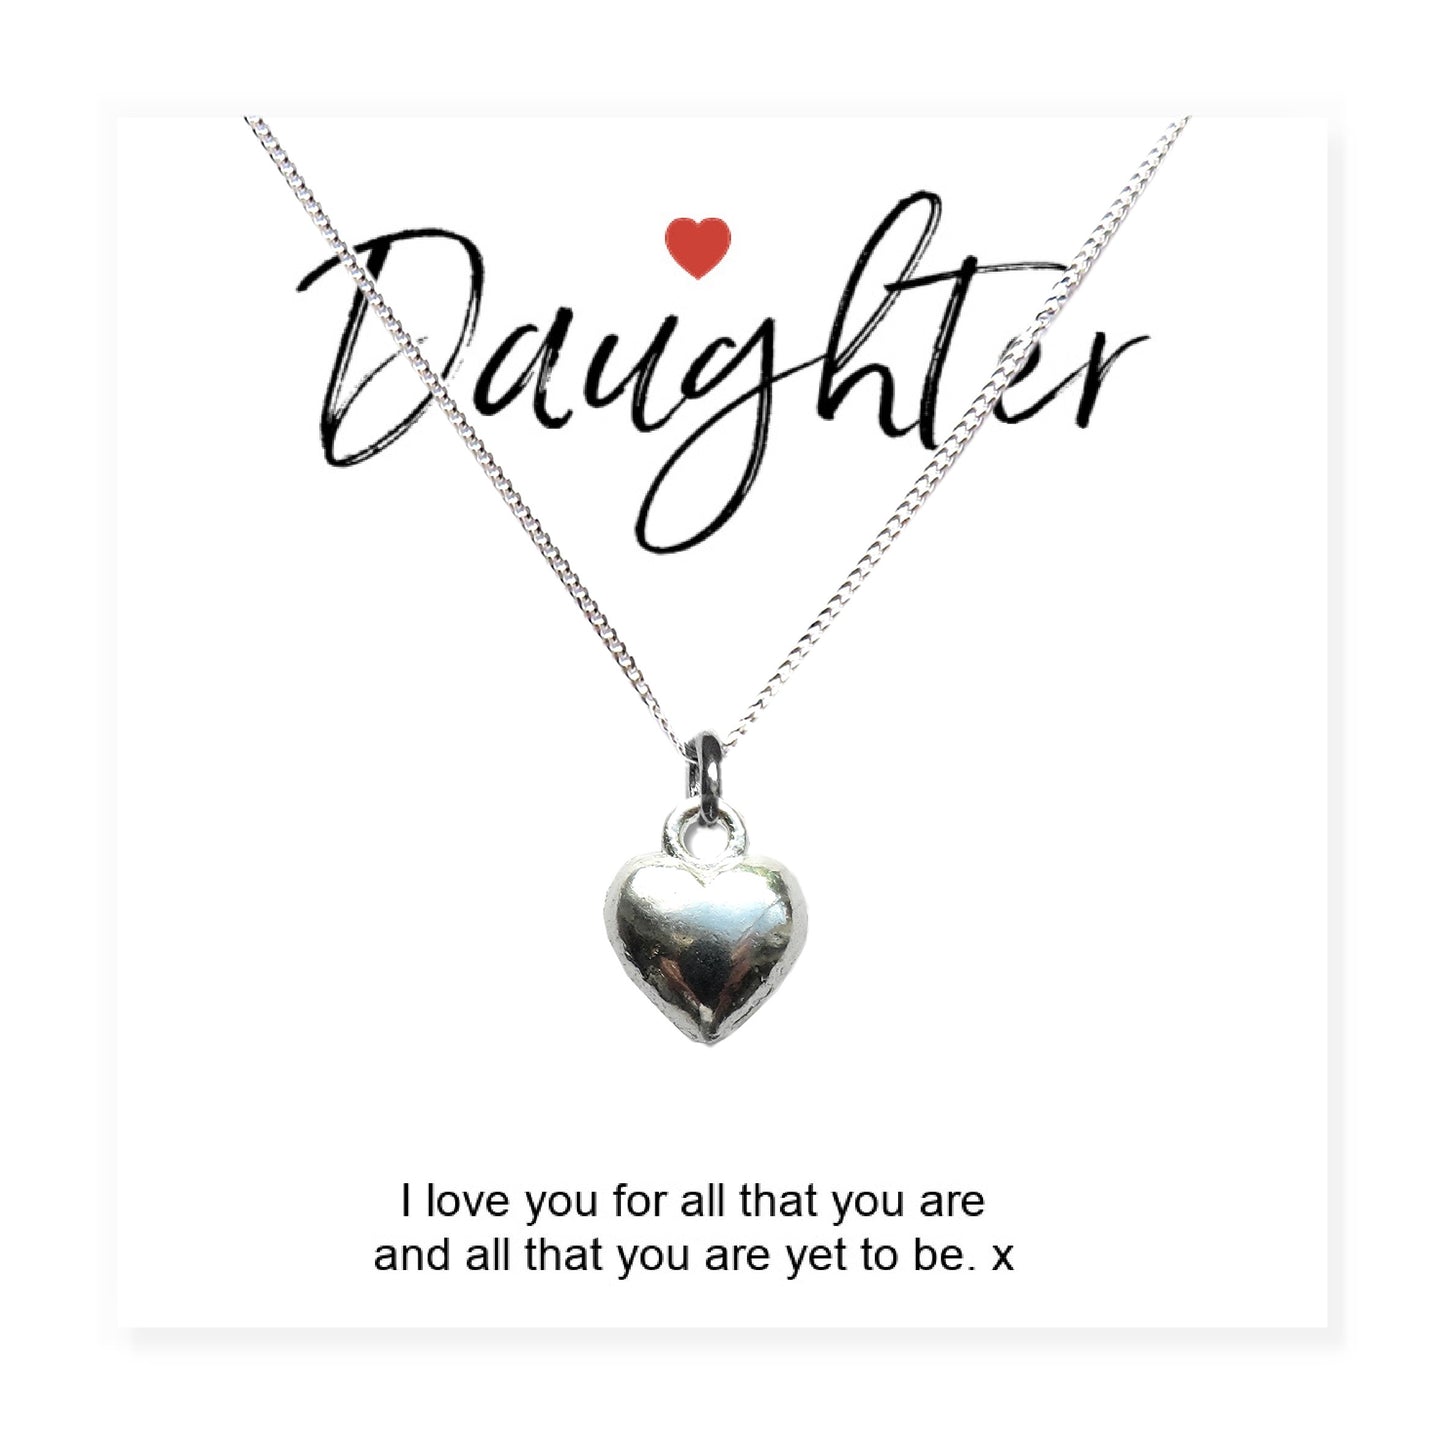 Daughter Gift Card with Heart Necklace